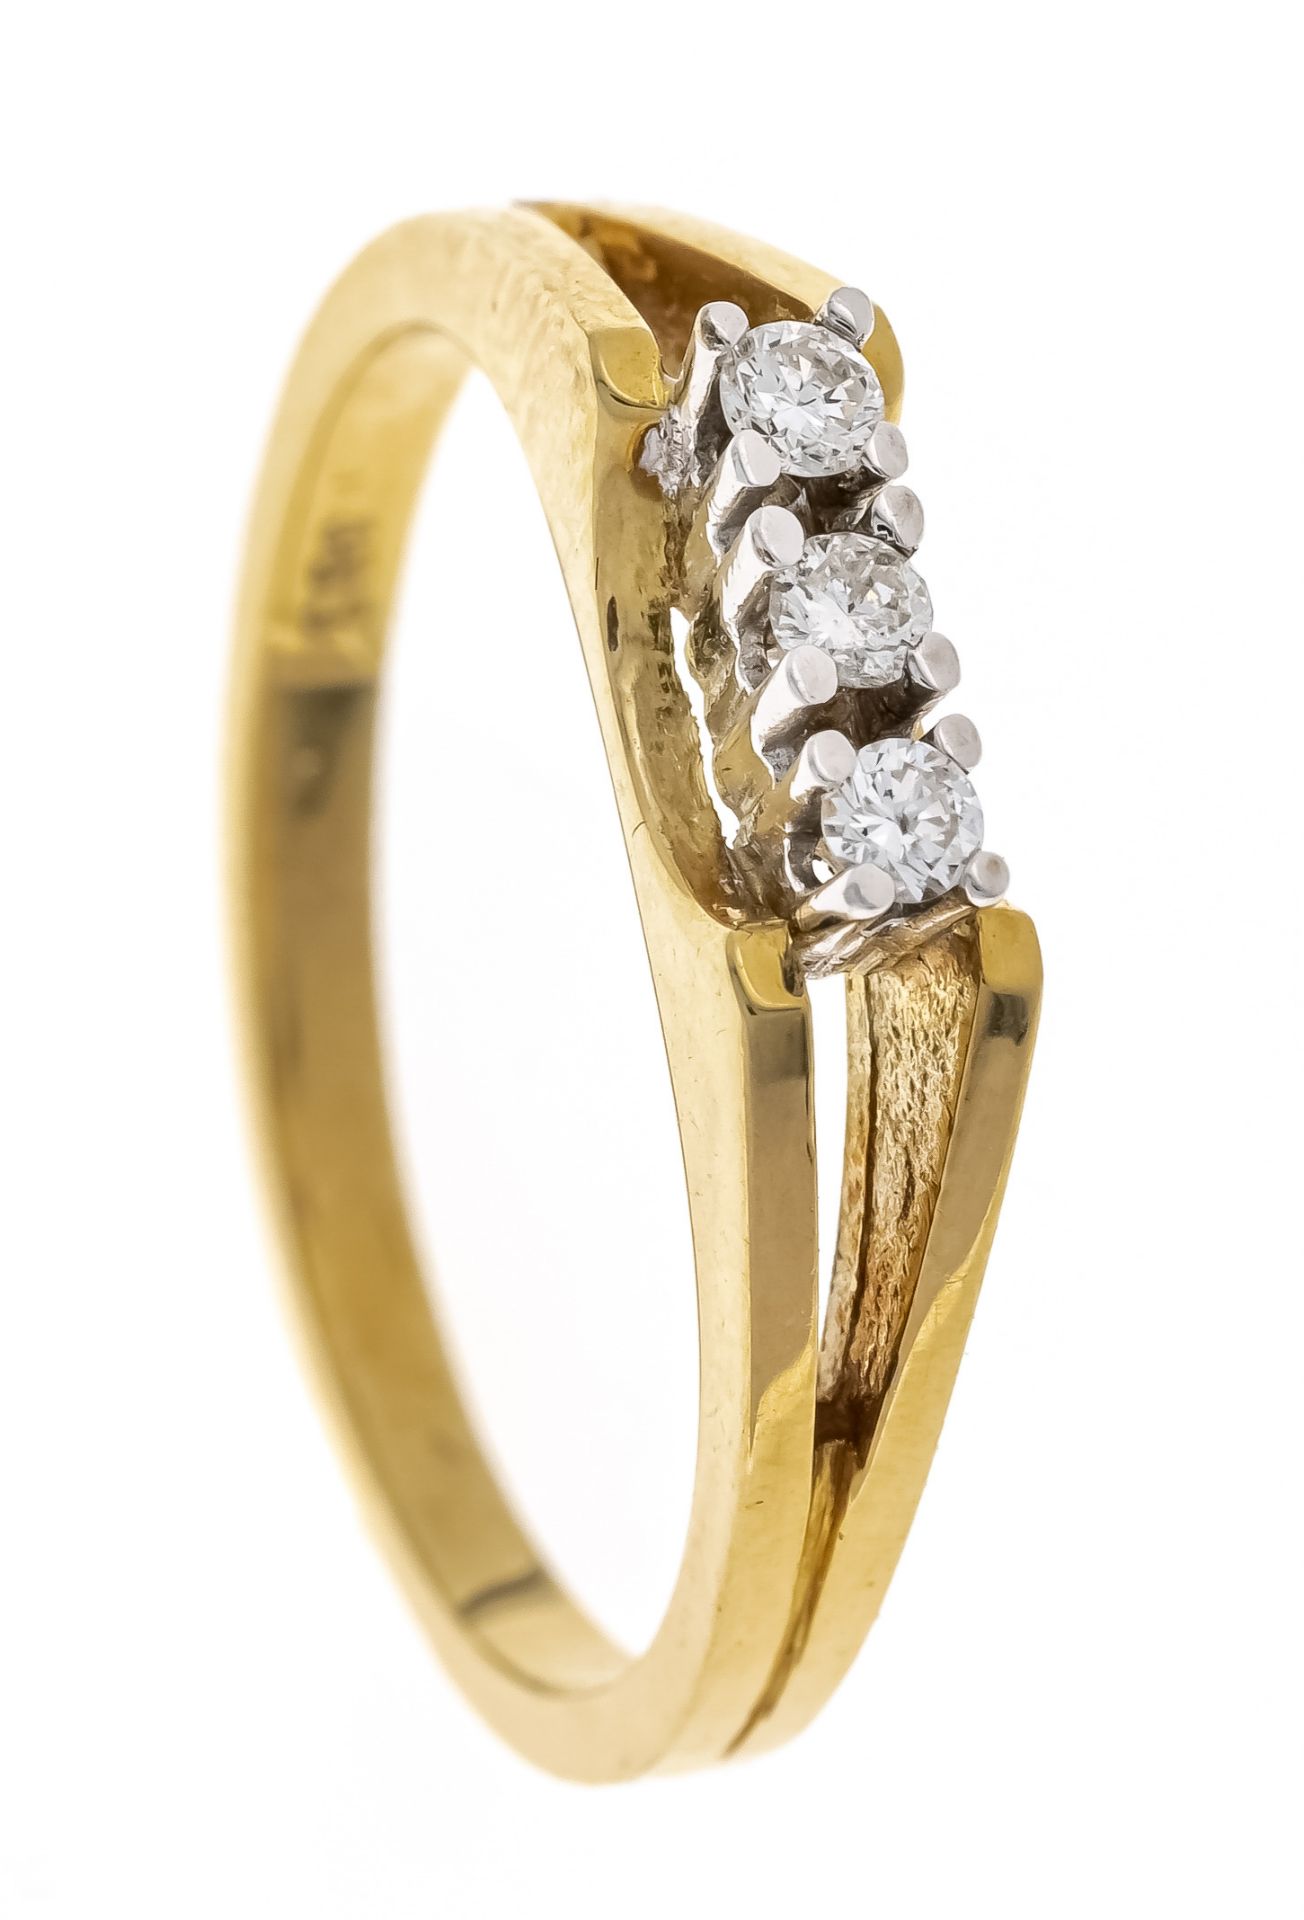 Solitaire diamond ring GG/WG 585/000 with 3 brilliant-cut diamonds, total 0.12 ct W/SI, RG 54, 3.3